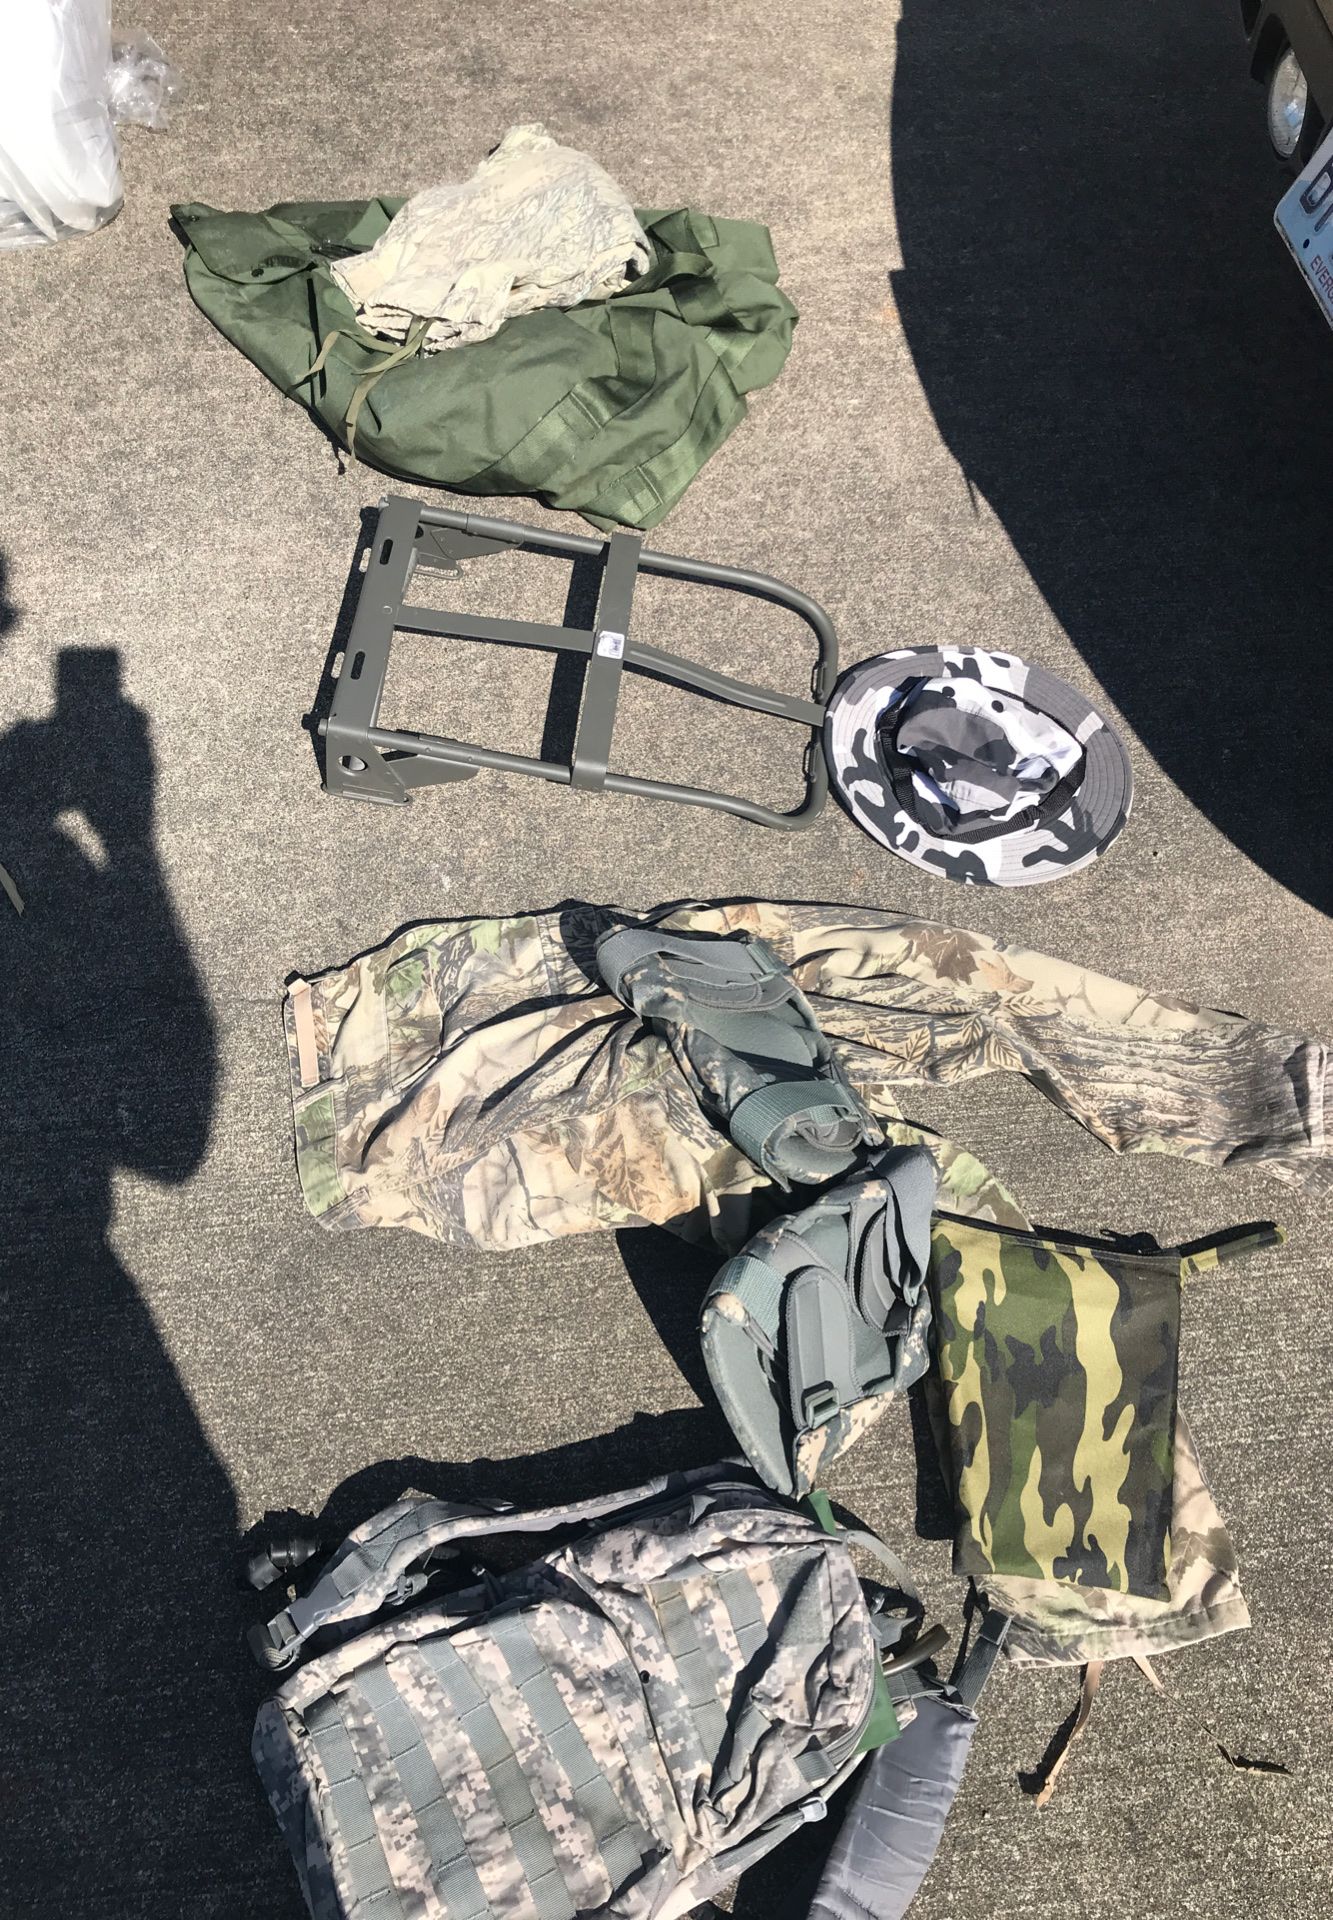 Camo and Army gear